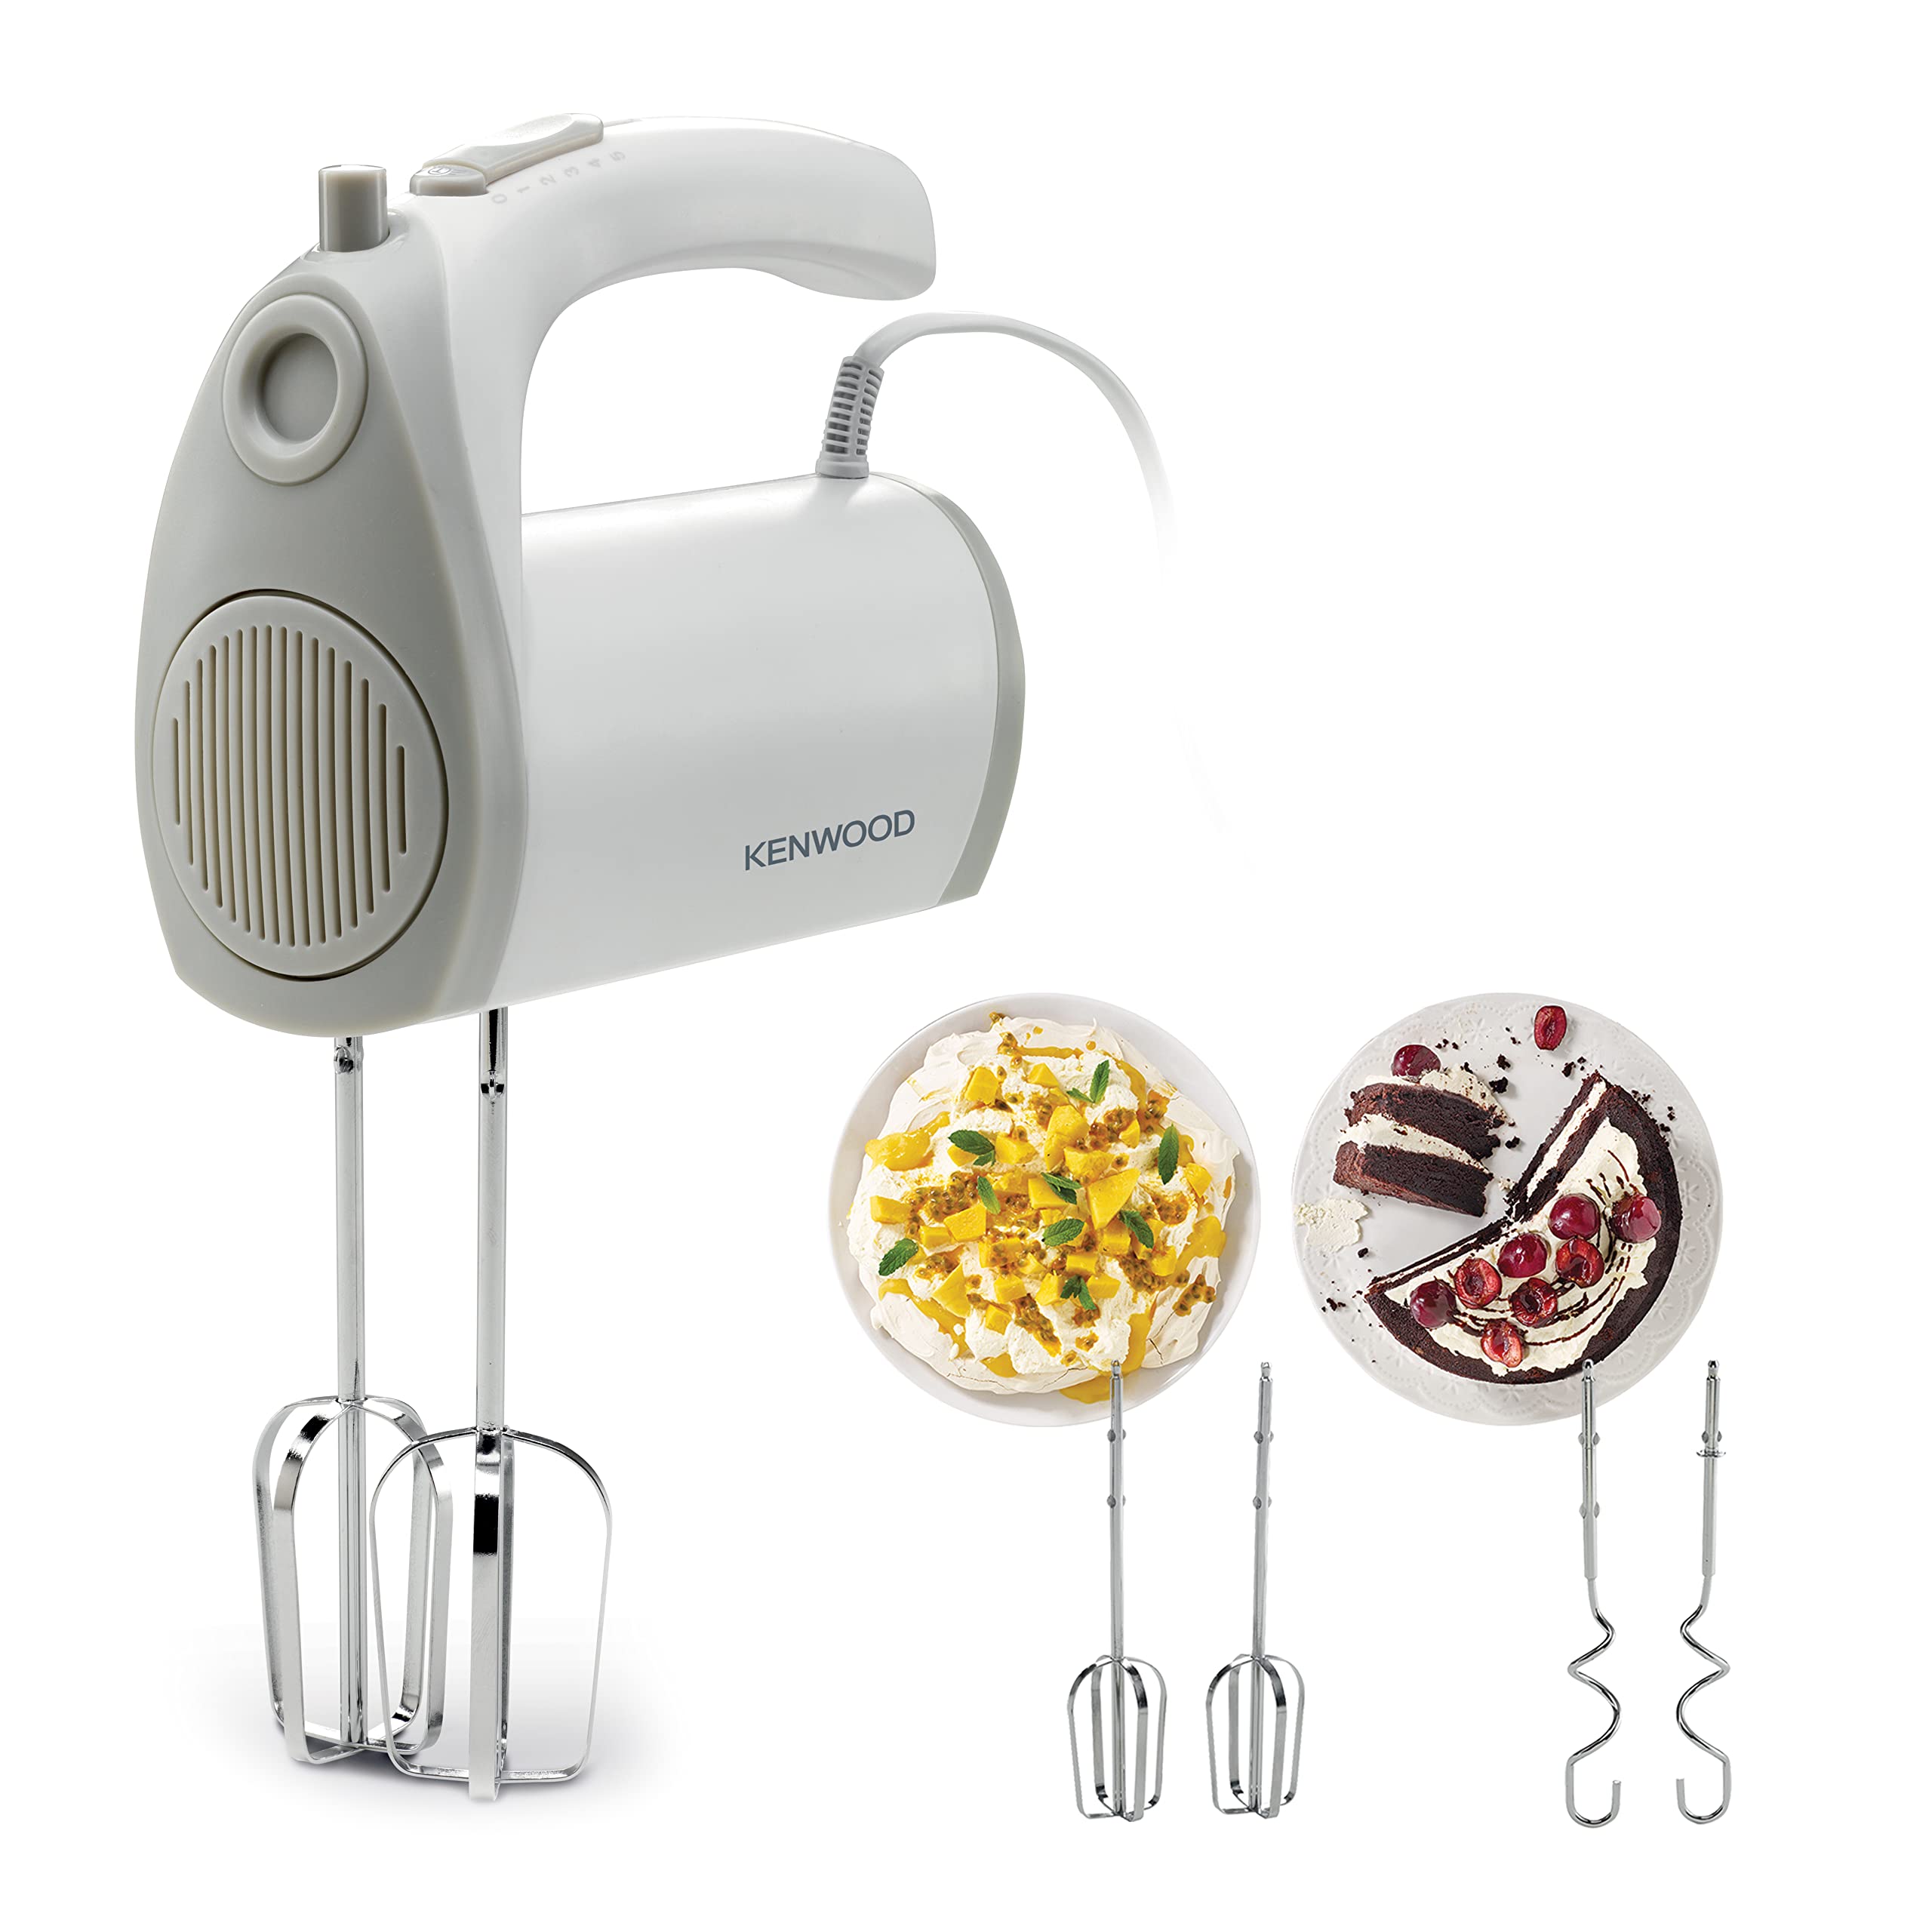 Kenwood Hand Mixer ,300 Watts, 5 Speeds + Turbo Button, Mixer And Double Stainless Steel